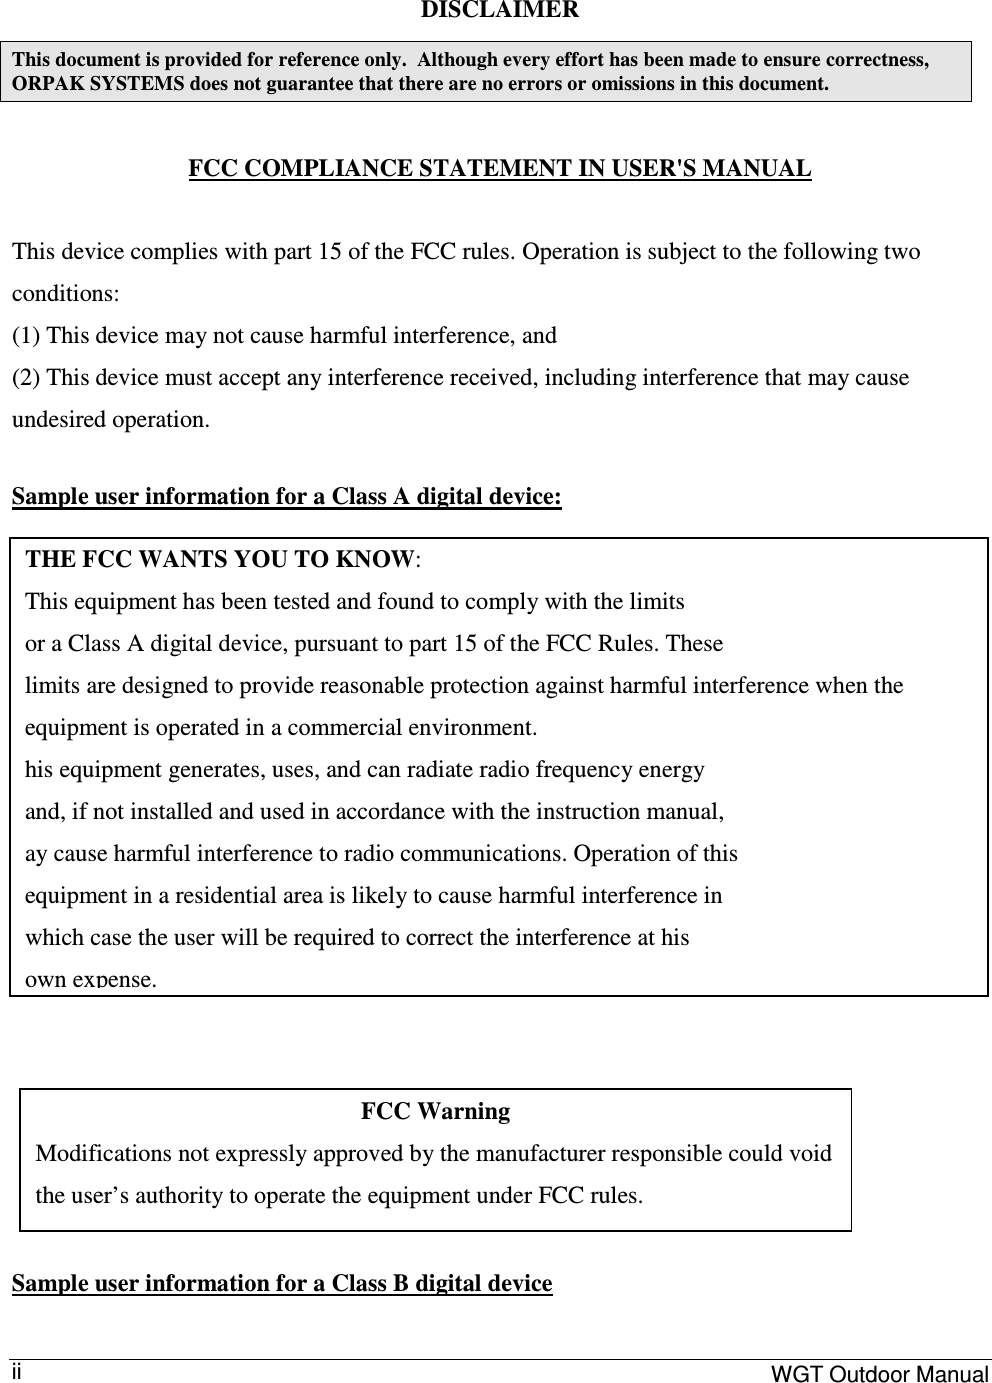     WGT Outdoor Manual  ii DISCLAIMER This document is provided for reference only.  Although every effort has been made to ensure correctness, ORPAK SYSTEMS does not guarantee that there are no errors or omissions in this document.  FCC COMPLIANCE STATEMENT IN USER&apos;S MANUAL  This device complies with part 15 of the FCC rules. Operation is subject to the following two conditions:  (1) This device may not cause harmful interference, and (2) This device must accept any interference received, including interference that may cause undesired operation.  Sample user information for a Class A digital device:        Sample user information for a Class B digital device THE FCC WANTS YOU TO KNOW: This equipment has been tested and found to comply with the limits or a Class A digital device, pursuant to part 15 of the FCC Rules. These limits are designed to provide reasonable protection against harmful interference when the equipment is operated in a commercial environment. his equipment generates, uses, and can radiate radio frequency energy and, if not installed and used in accordance with the instruction manual, ay cause harmful interference to radio communications. Operation of this equipment in a residential area is likely to cause harmful interference in which case the user will be required to correct the interference at his own expense. FCC Warning Modifications not expressly approved by the manufacturer responsible could void the user’s authority to operate the equipment under FCC rules. 